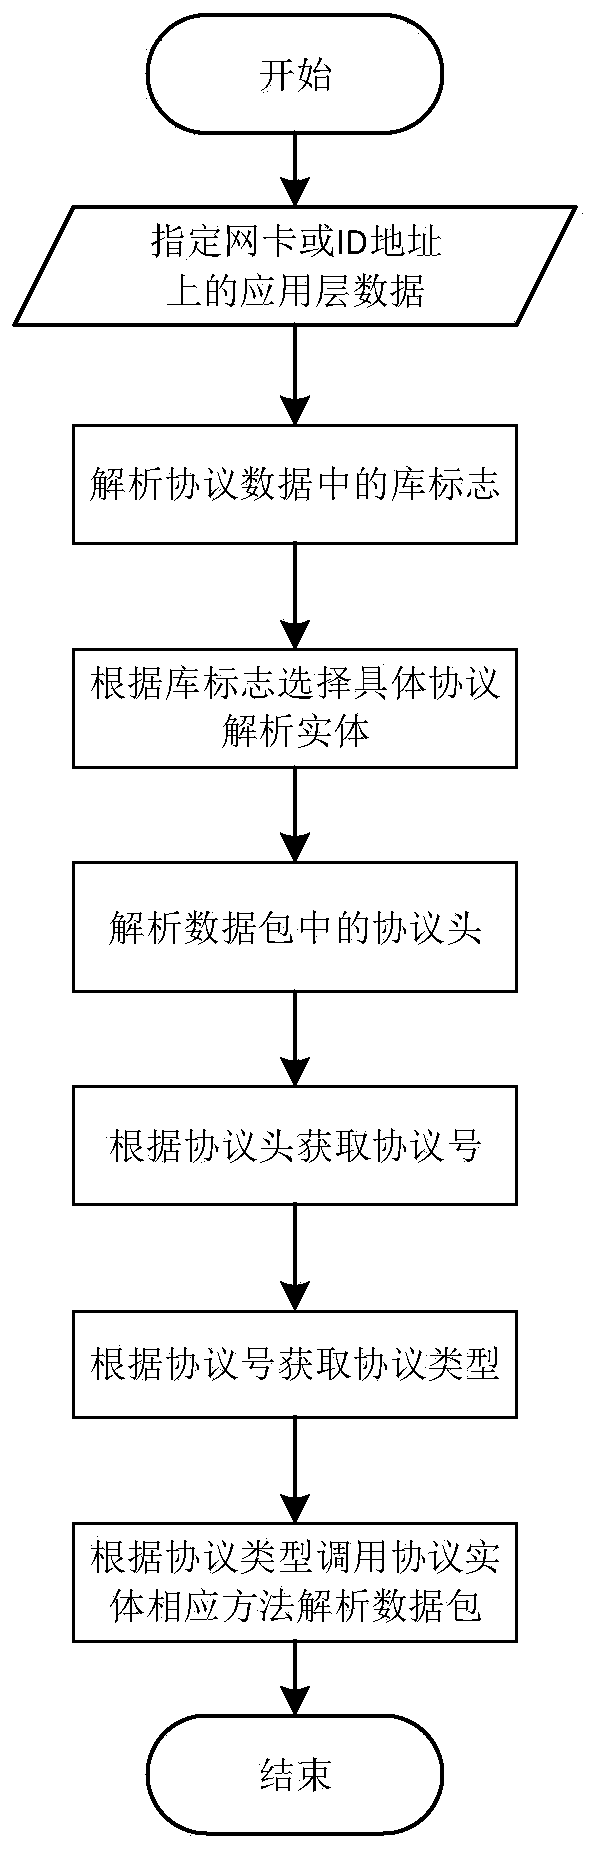 ATS protocol forwarding processing system and method based on protocol library